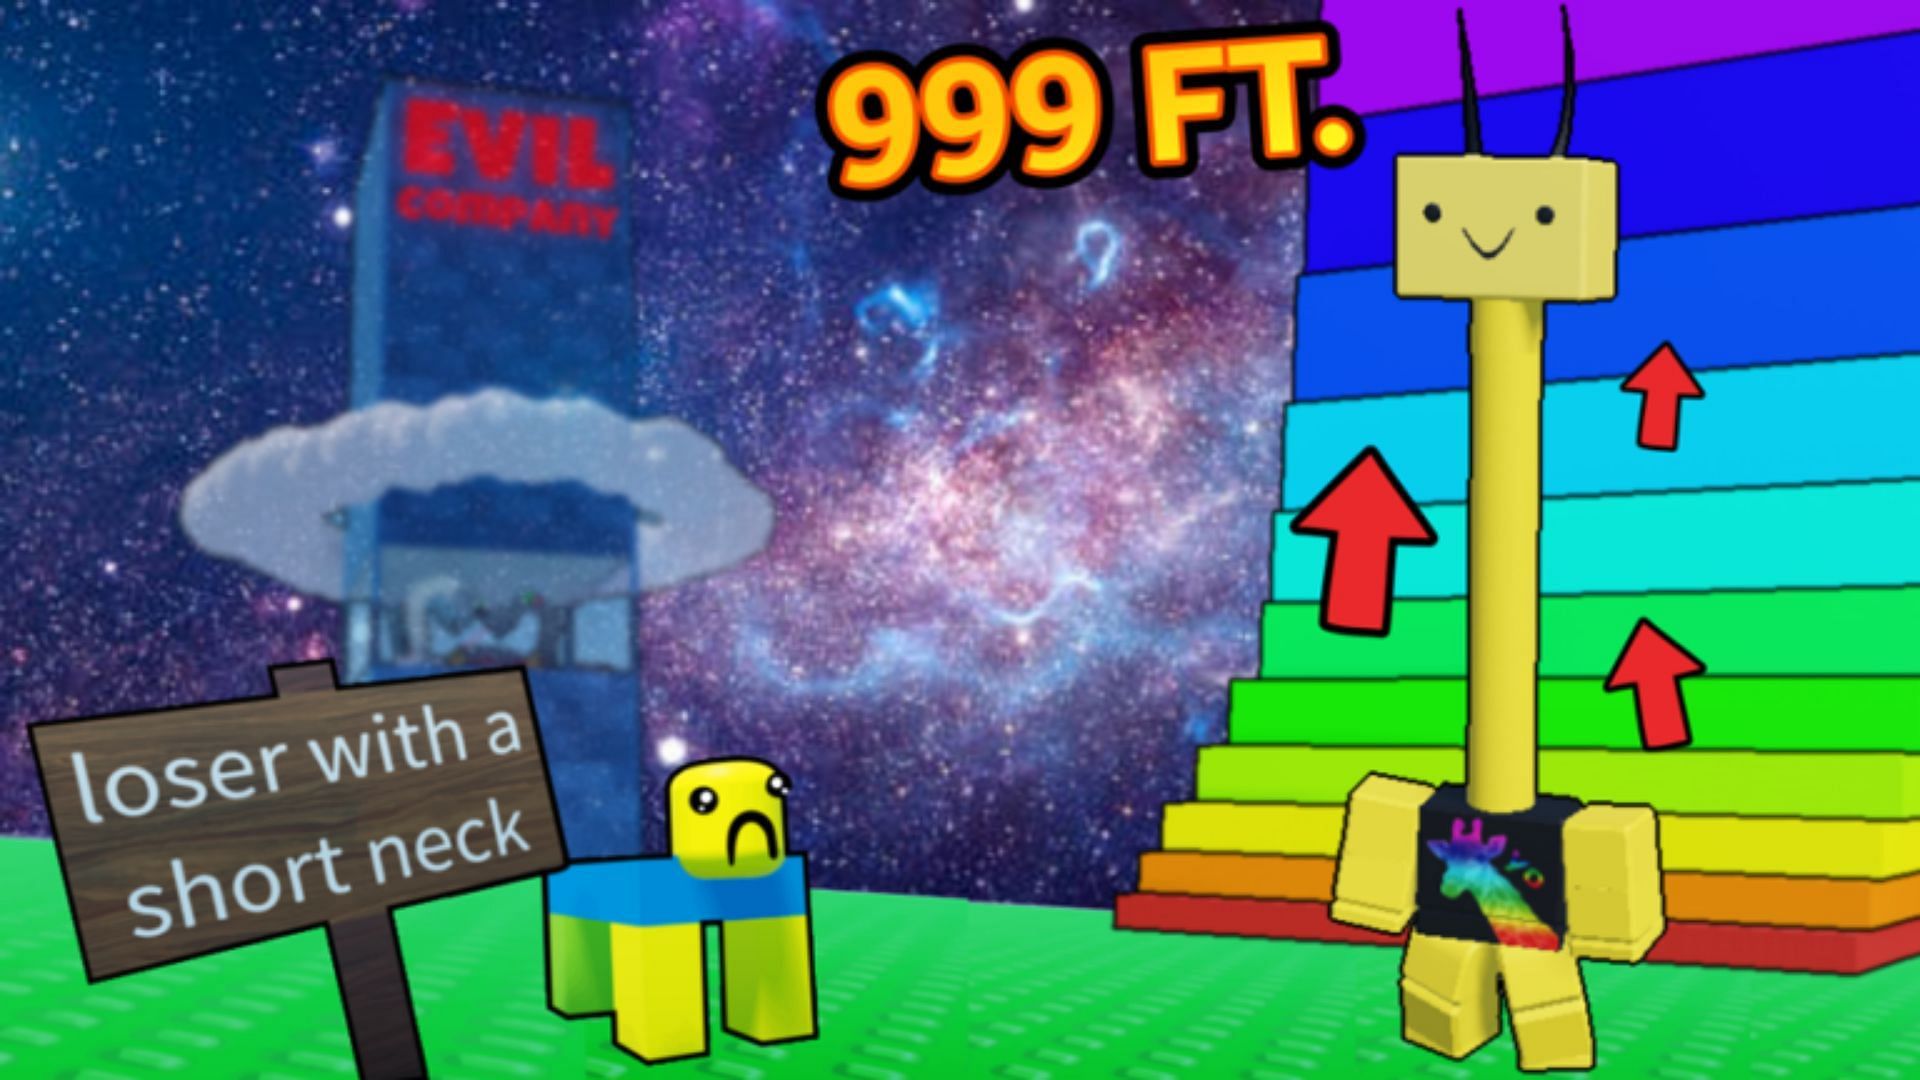 Codes for Every Second Your Neck Grows and their importance (Image via Roblox)